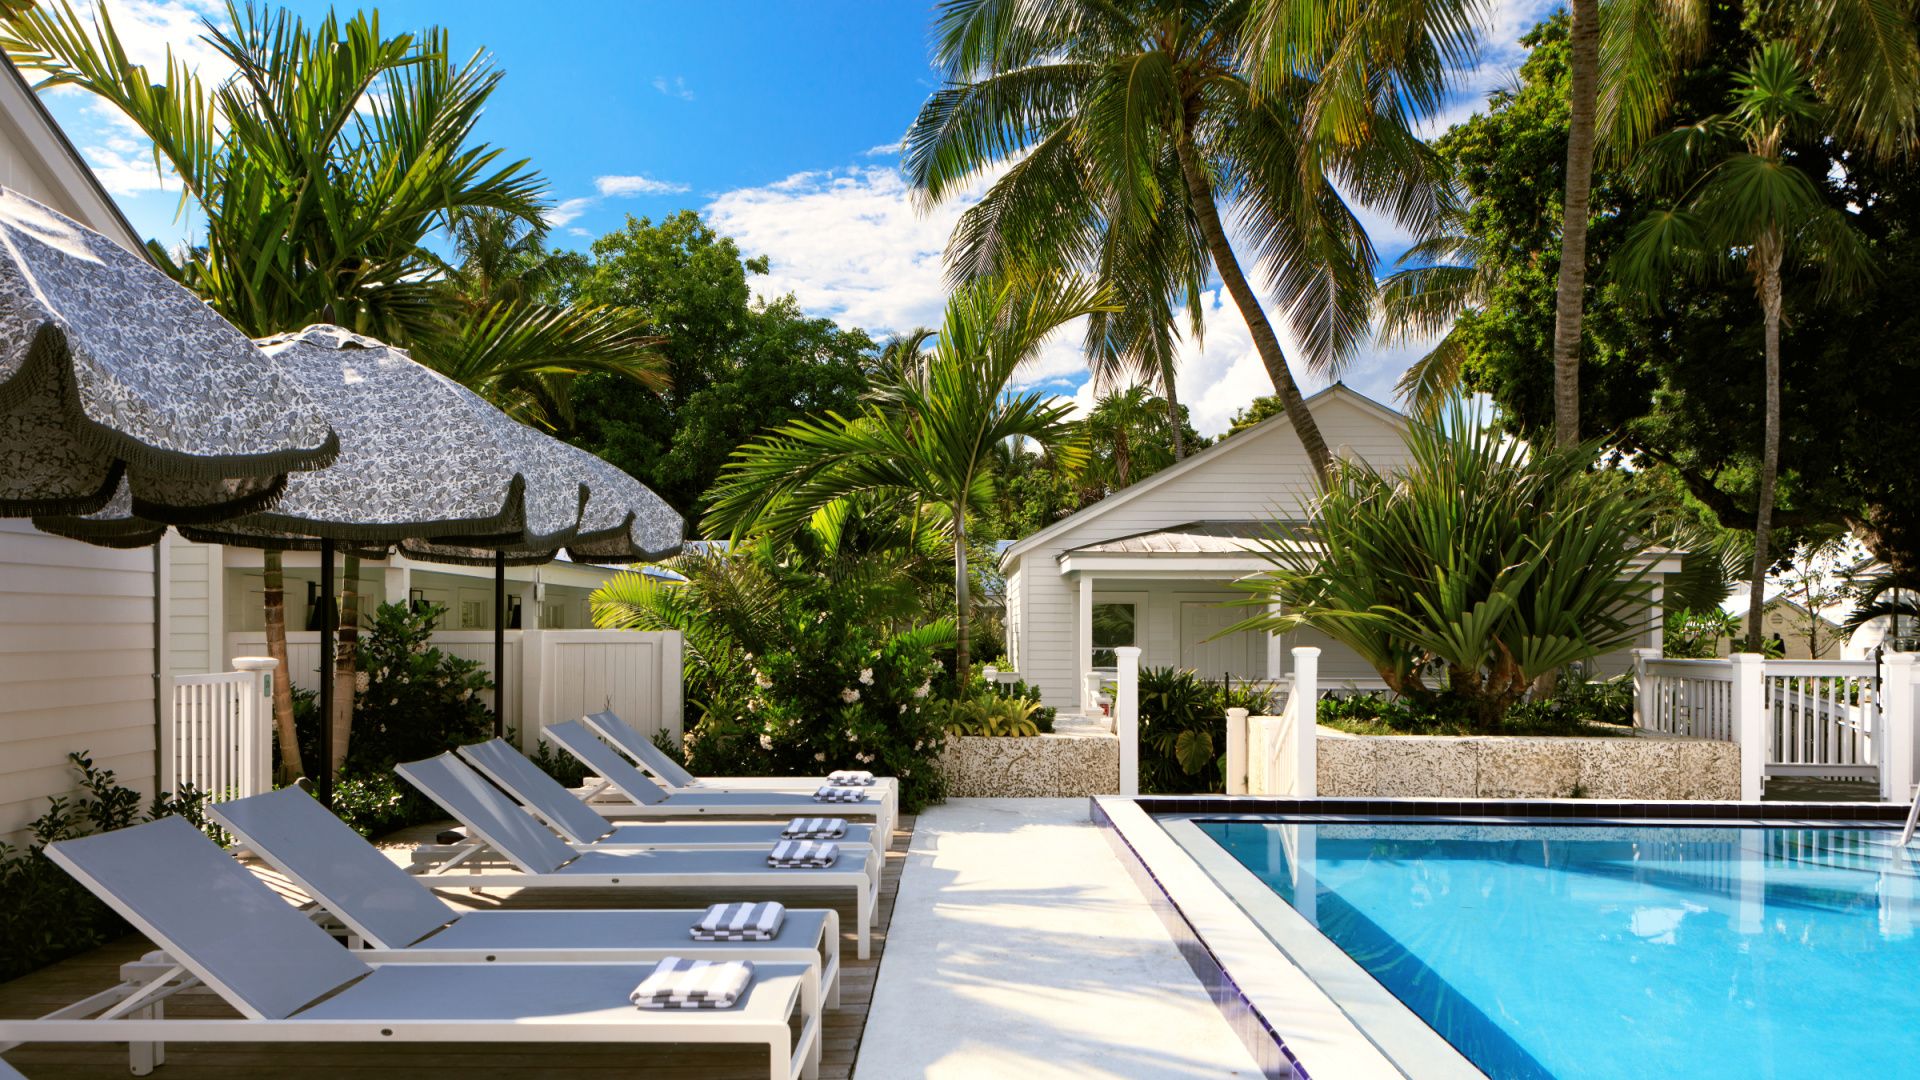 swimming pool with umbrellas and lounge chairs in white and blue in key west